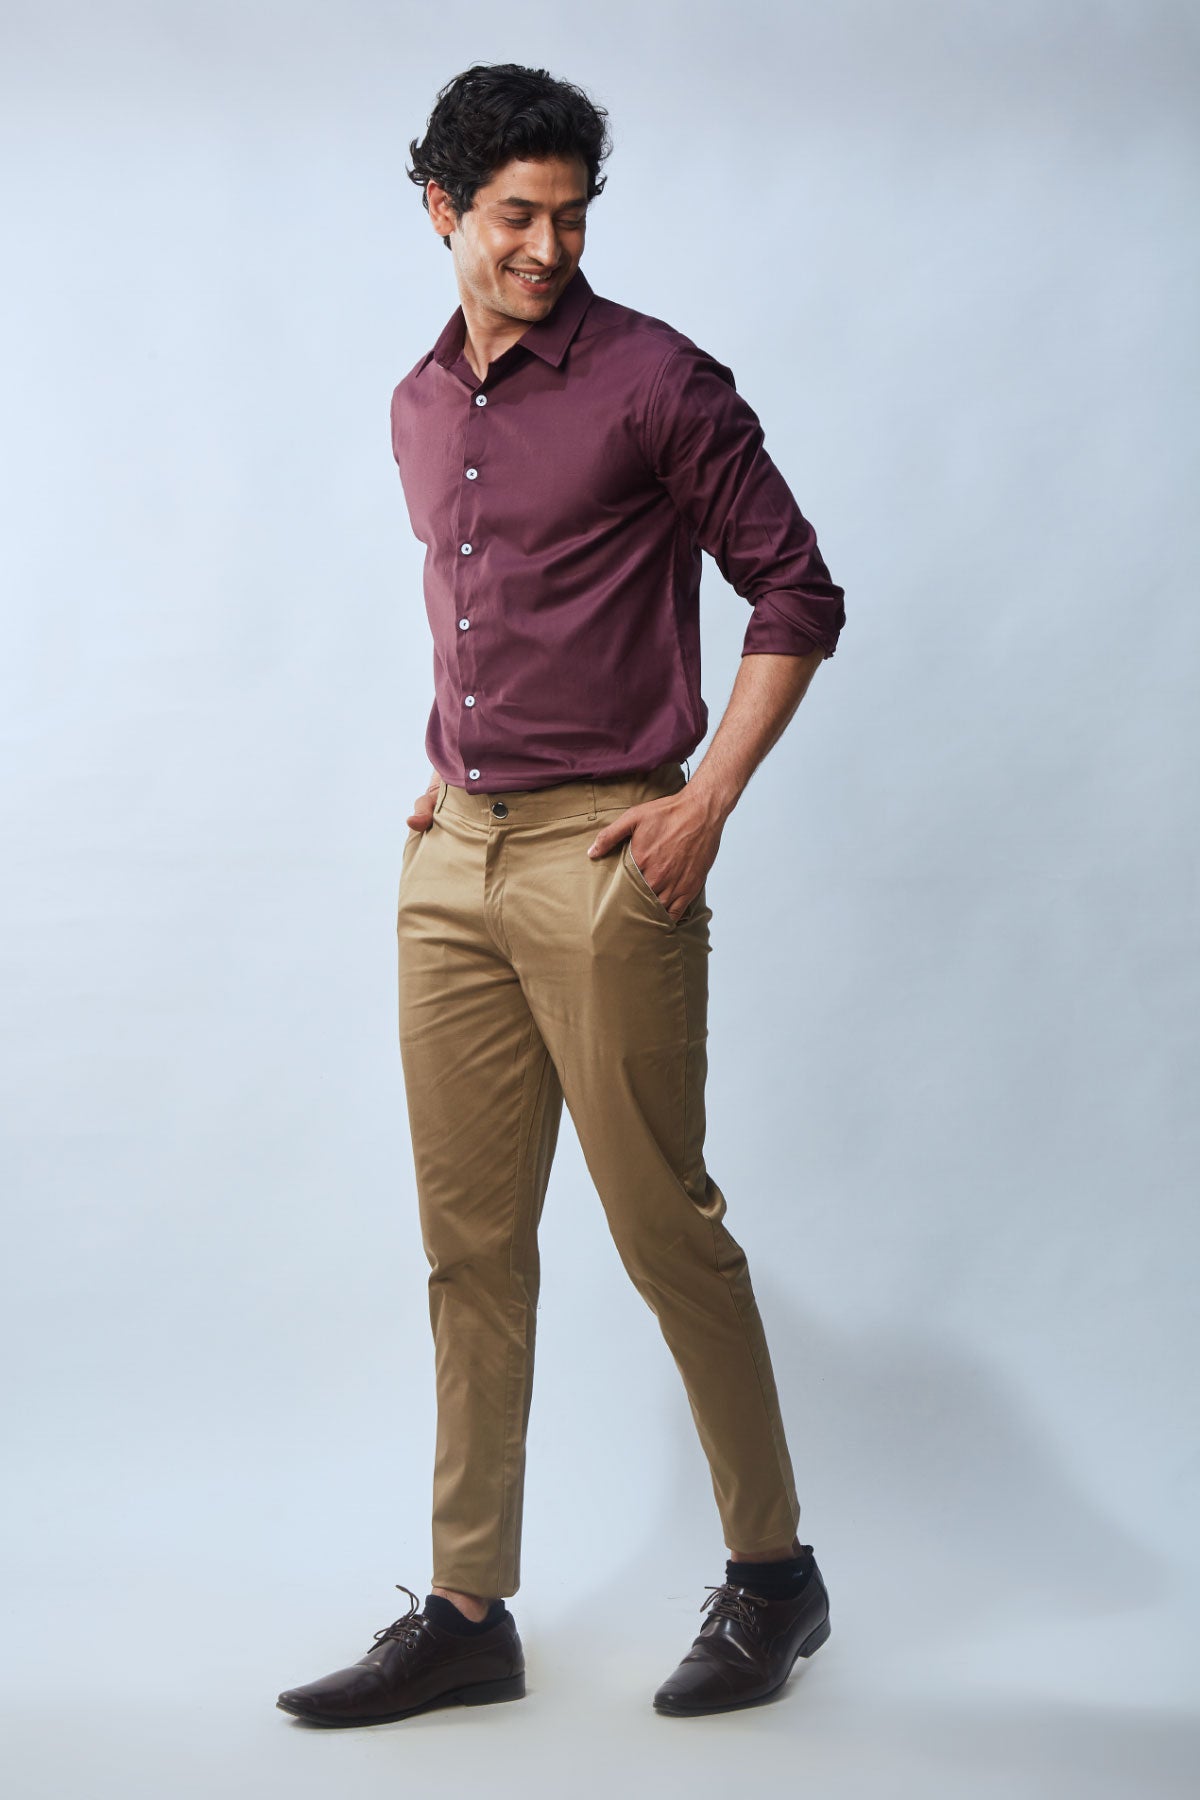 What color shirts goes best with cream color pants? - Quora